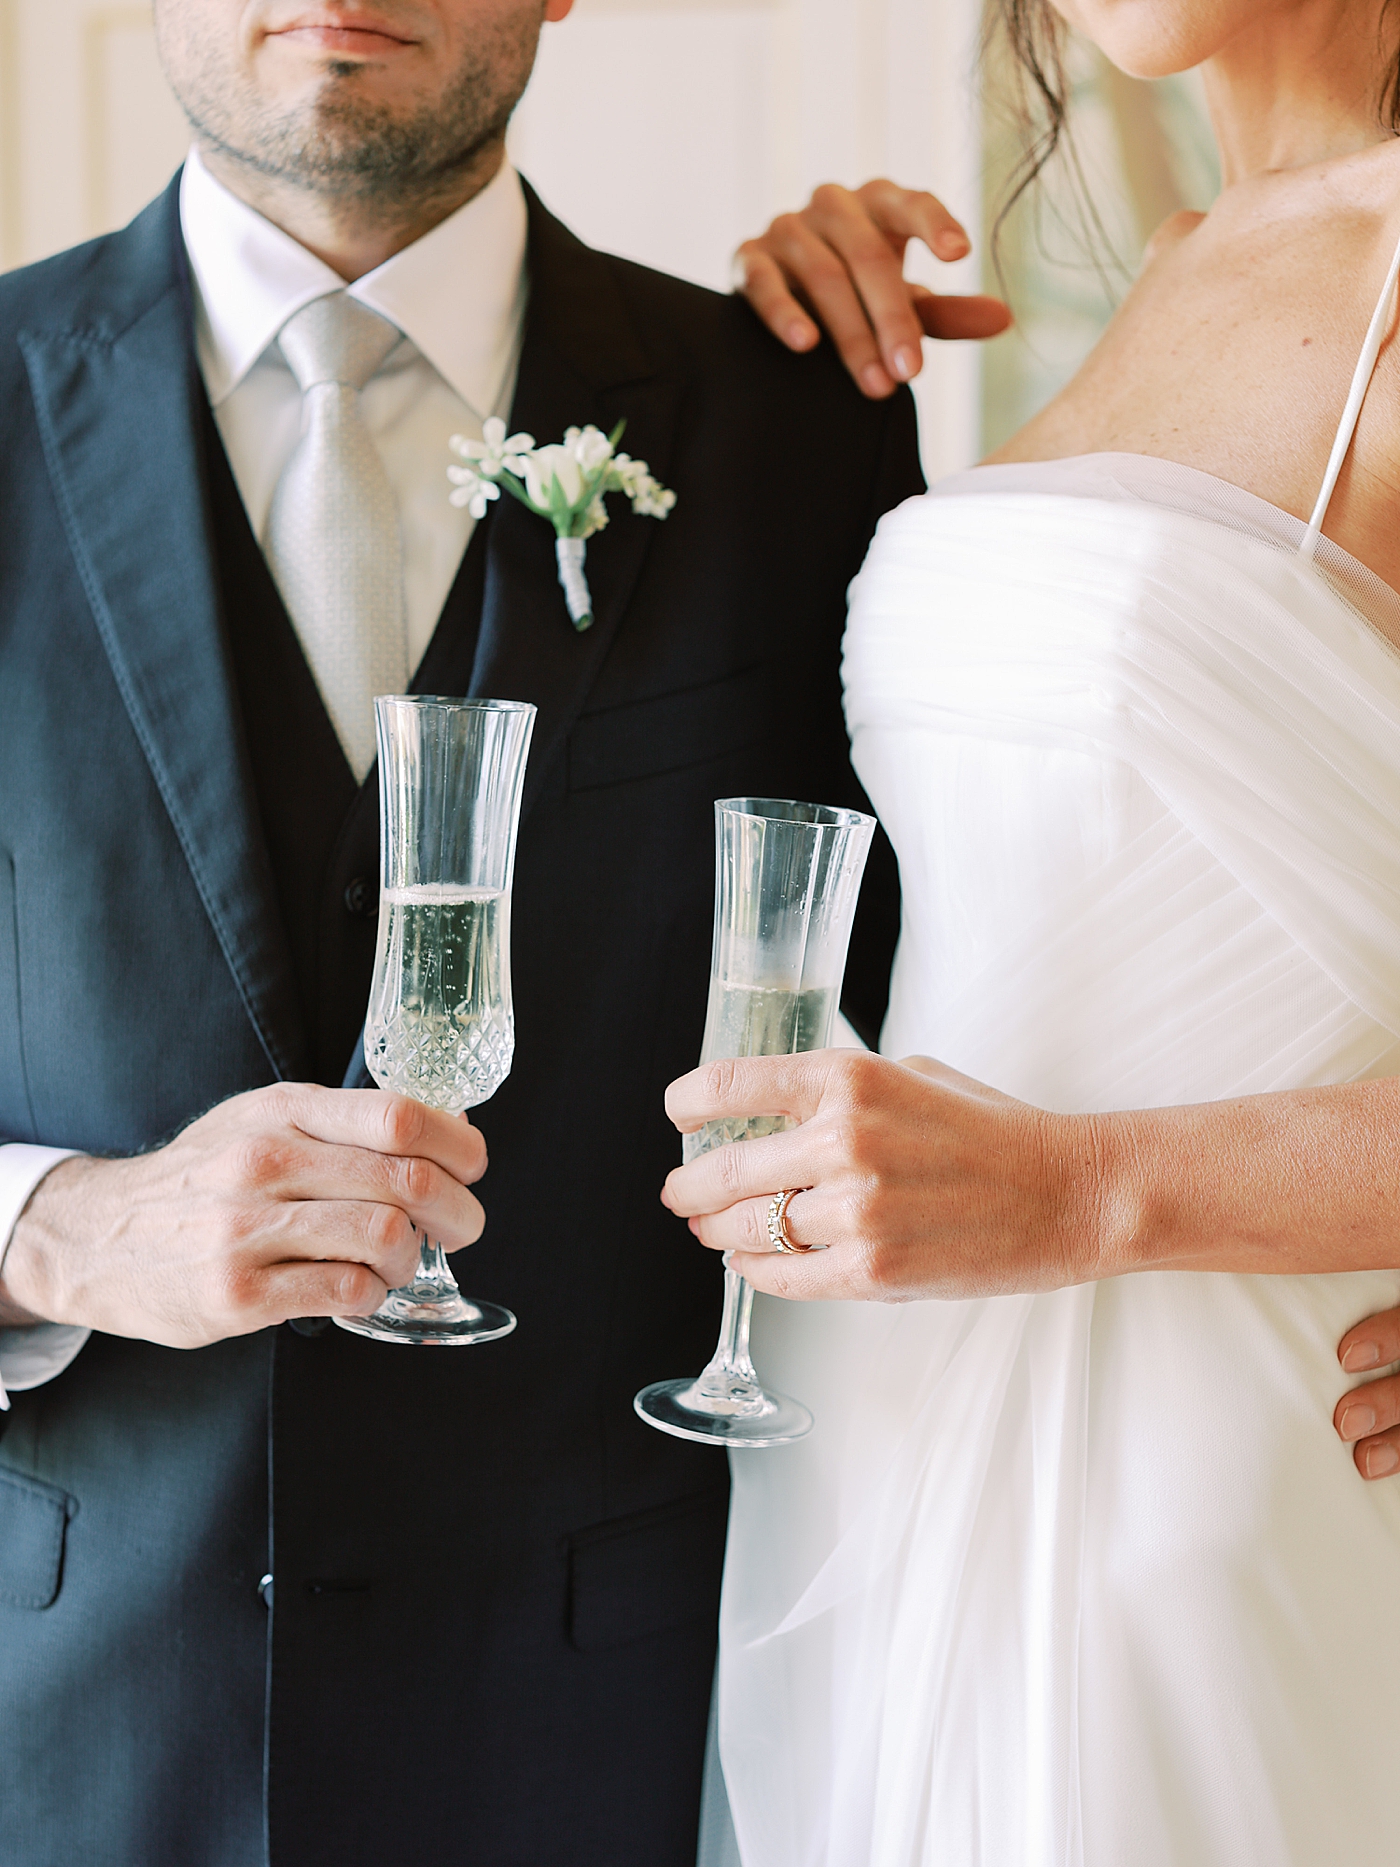 Detail of bride and groom champagne glasses | Image by Diane Sotero Photography